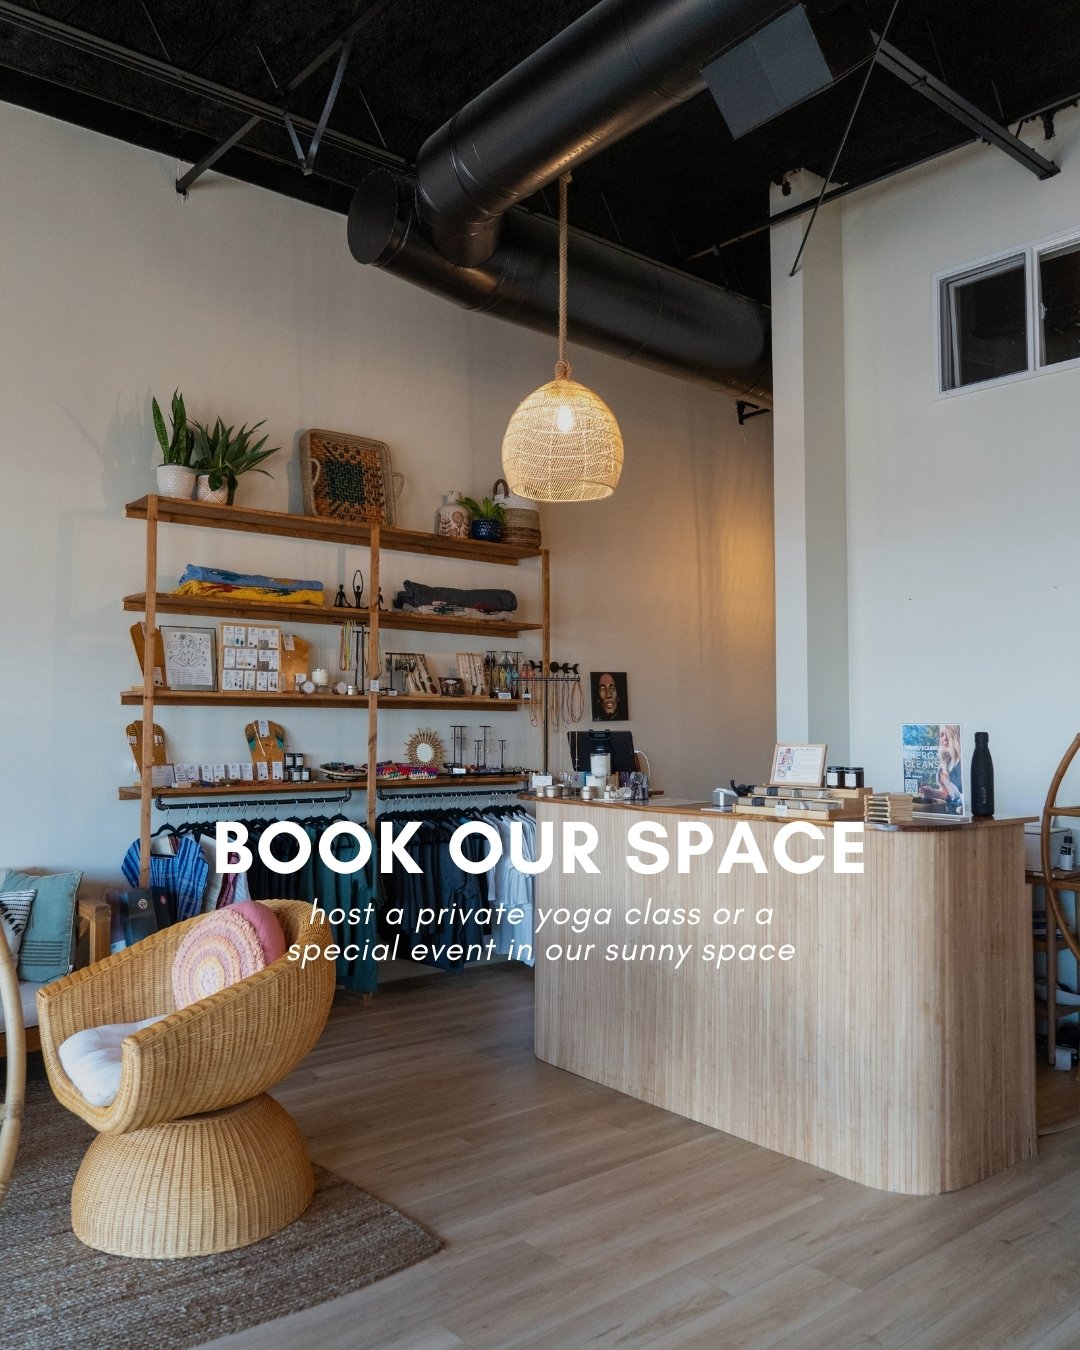 We *love* sharing our space with our community in Austin! If you're looking for the perfect space to host a private event or yoga class, our beautiful practice rooms are available when class is not in session! Whether it's a fundraising event, an off